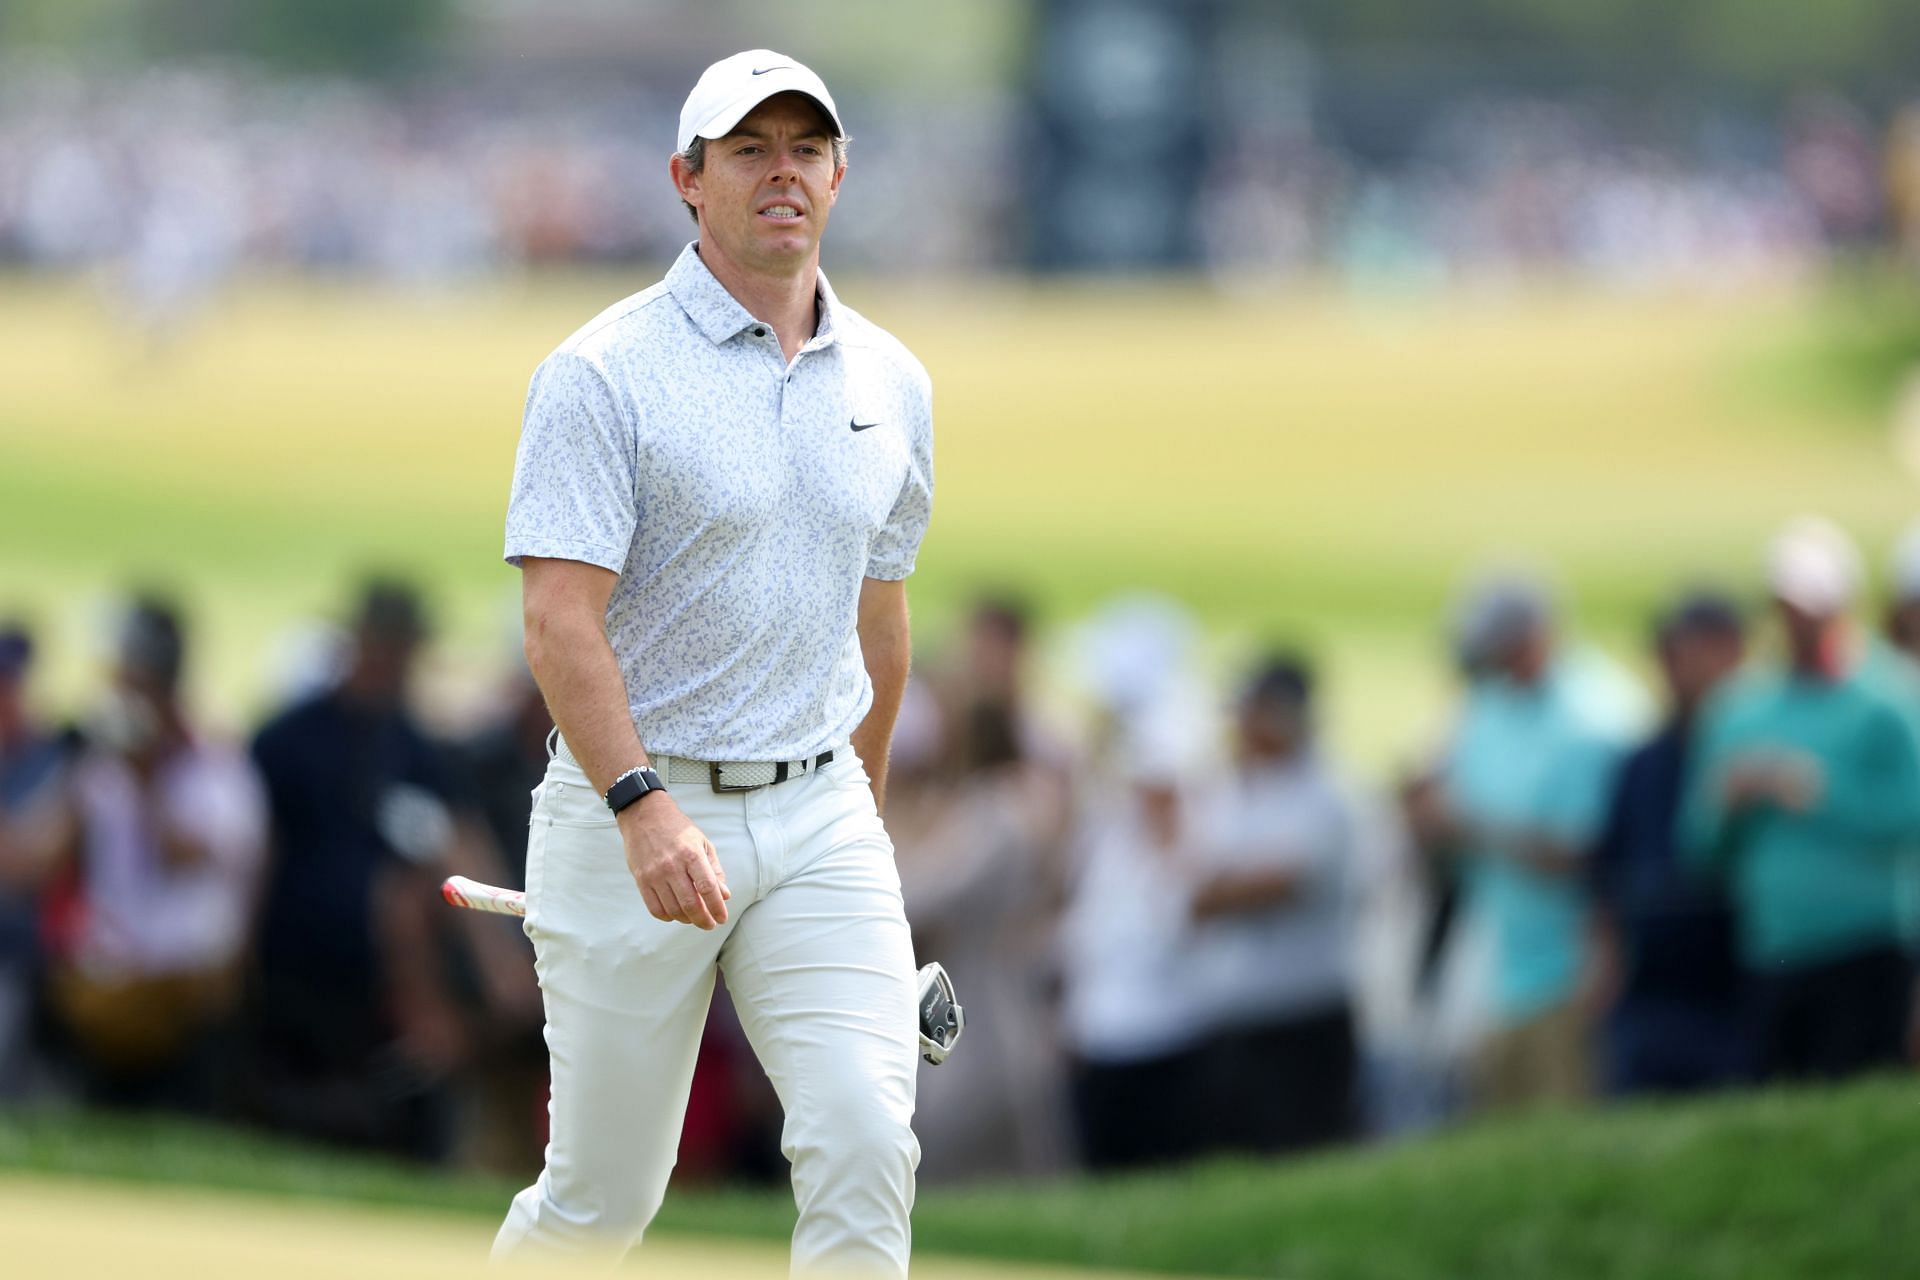 Rory McIlroy turned in a fine performance at the PGA Championship